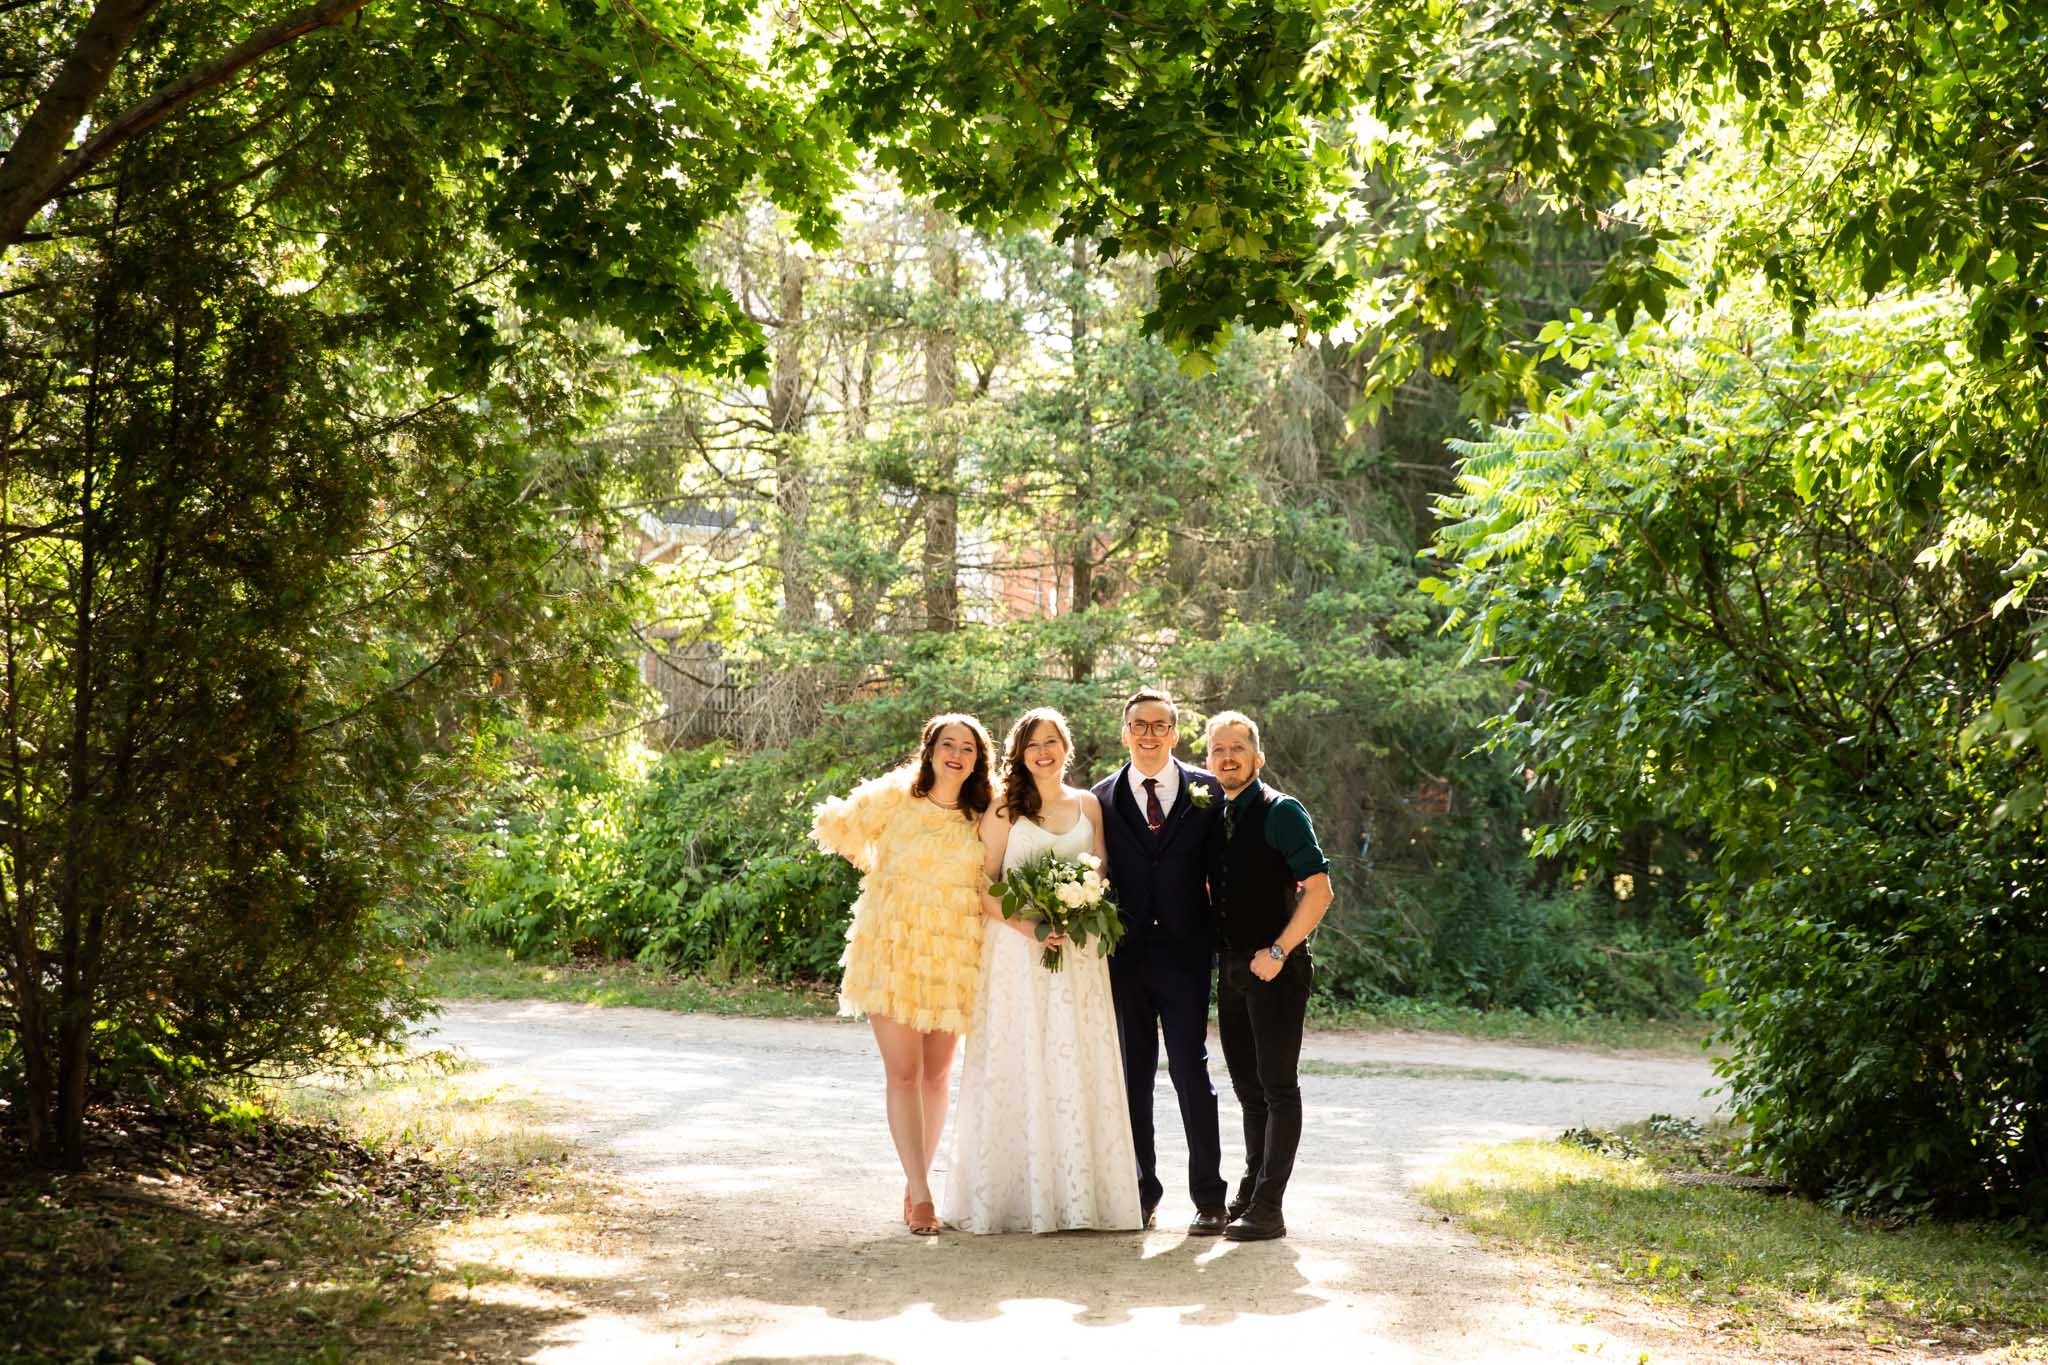 full body image of wedding party backlit and framed by trees on a path in a park.jpg